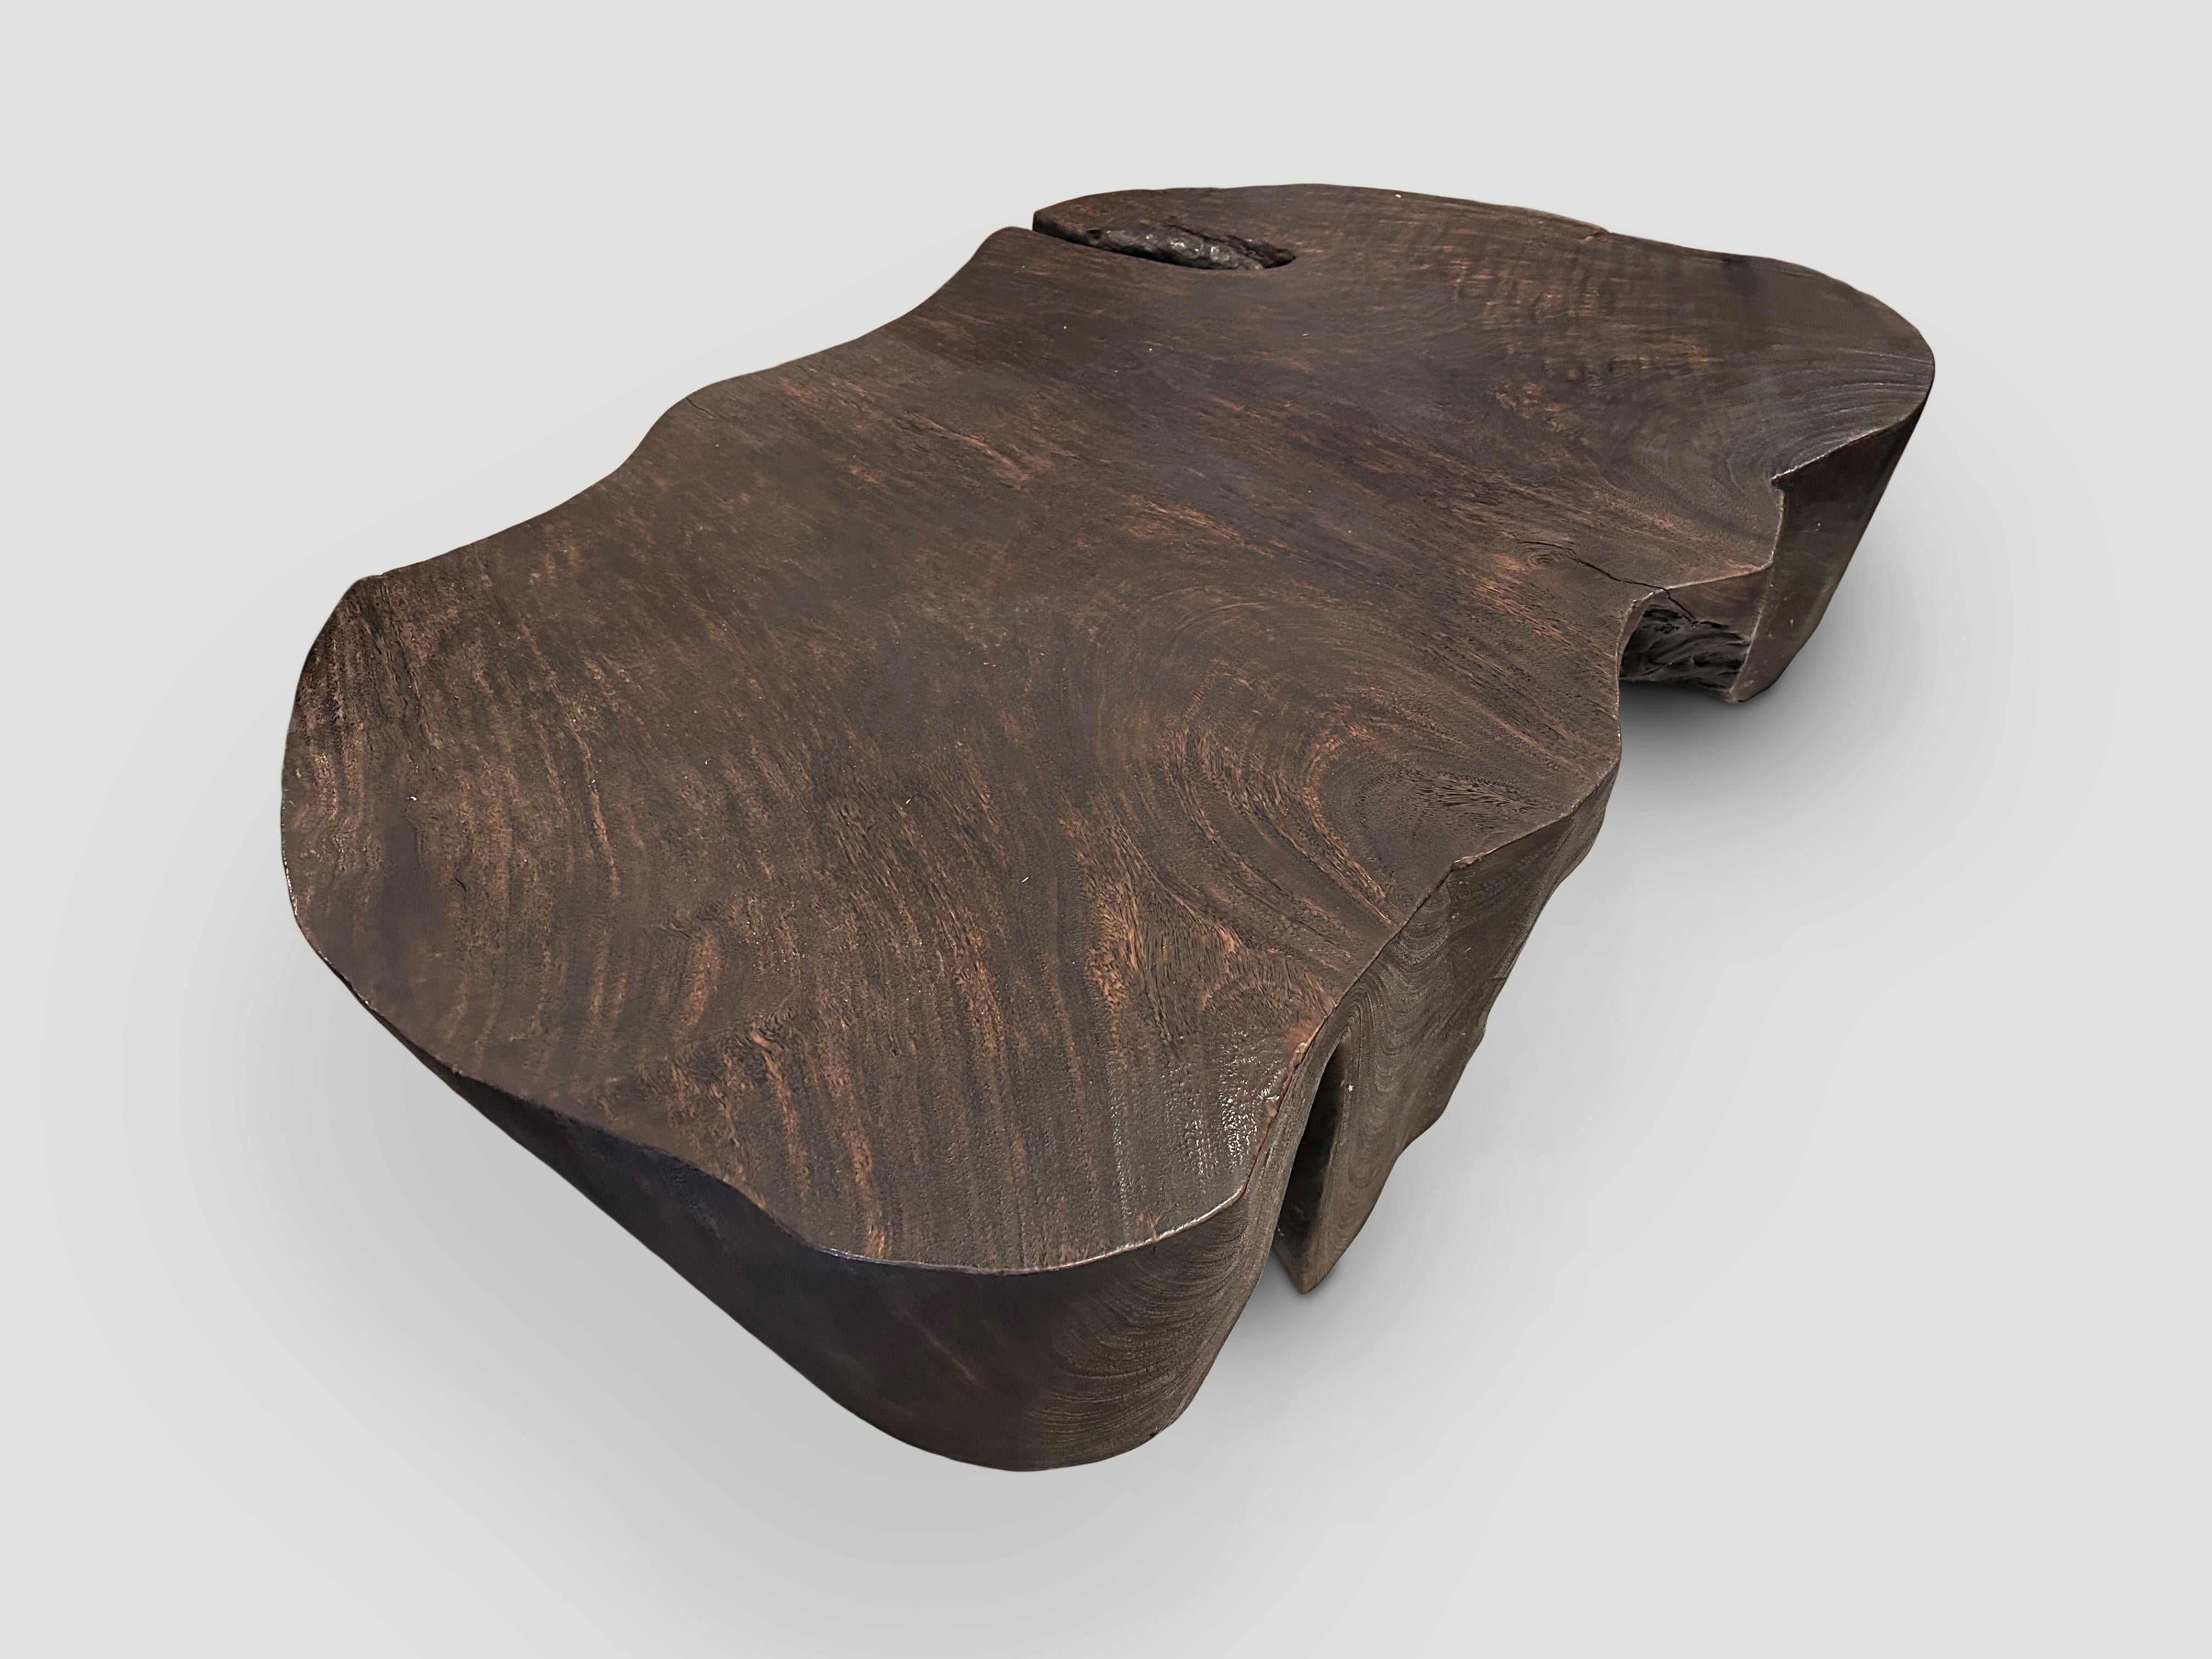 Impressive natural organic formed reclaimed suar wood coffee table both usable and sculptural. The legs and top are carved out of one root and charred to a rich chocolate brown. Finally we rubbed the wood with a wire brush revealing the beautiful